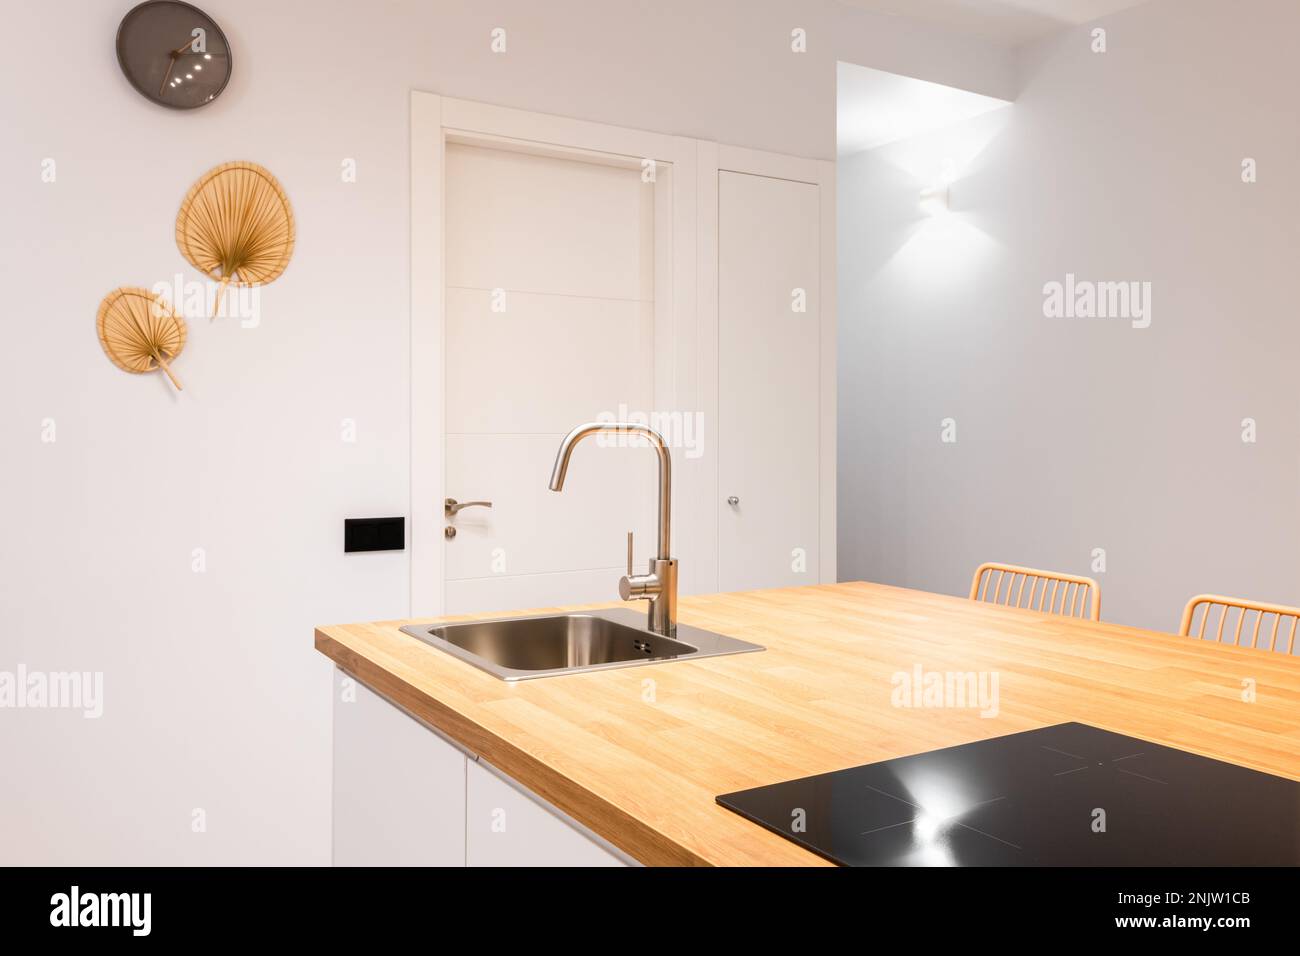 https://c8.alamy.com/comp/2NJW1CB/closeup-of-kitchen-island-wooden-table-top-in-single-honey-color-palette-countertop-has-built-in-sink-and-ceramic-plate-above-which-exhaust-system-2NJW1CB.jpg